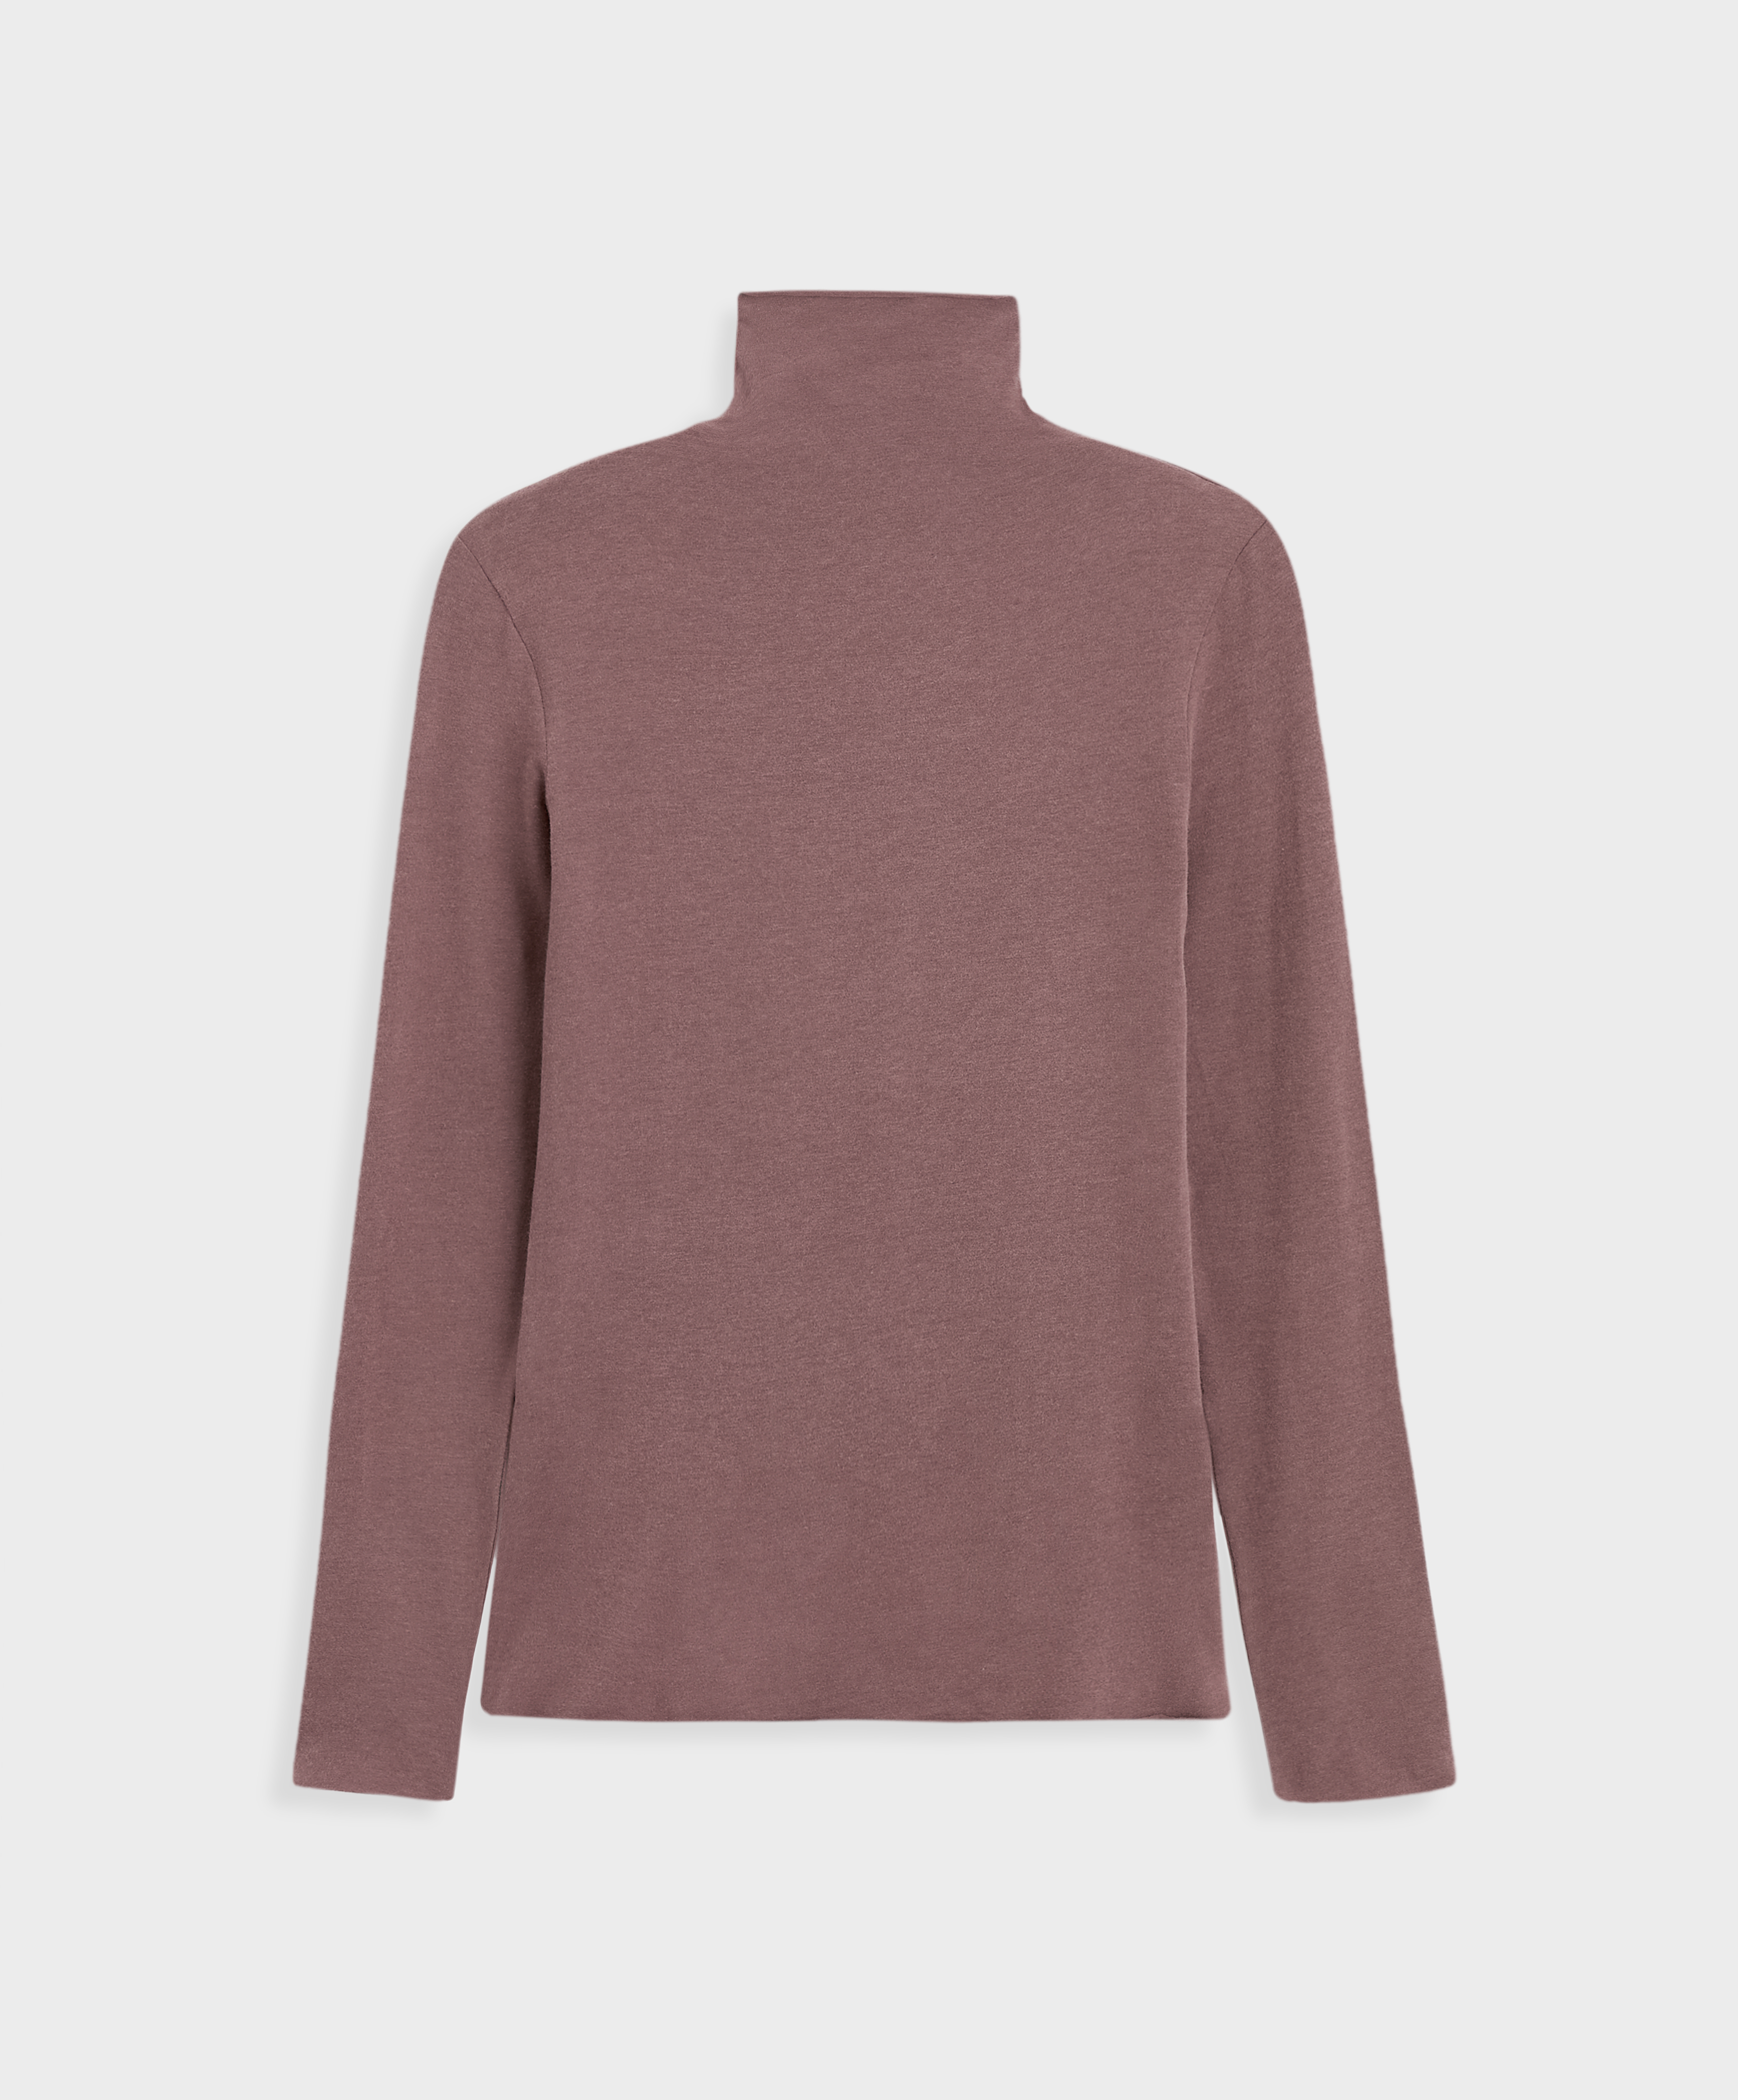 Modal long-sleeved top with high neck